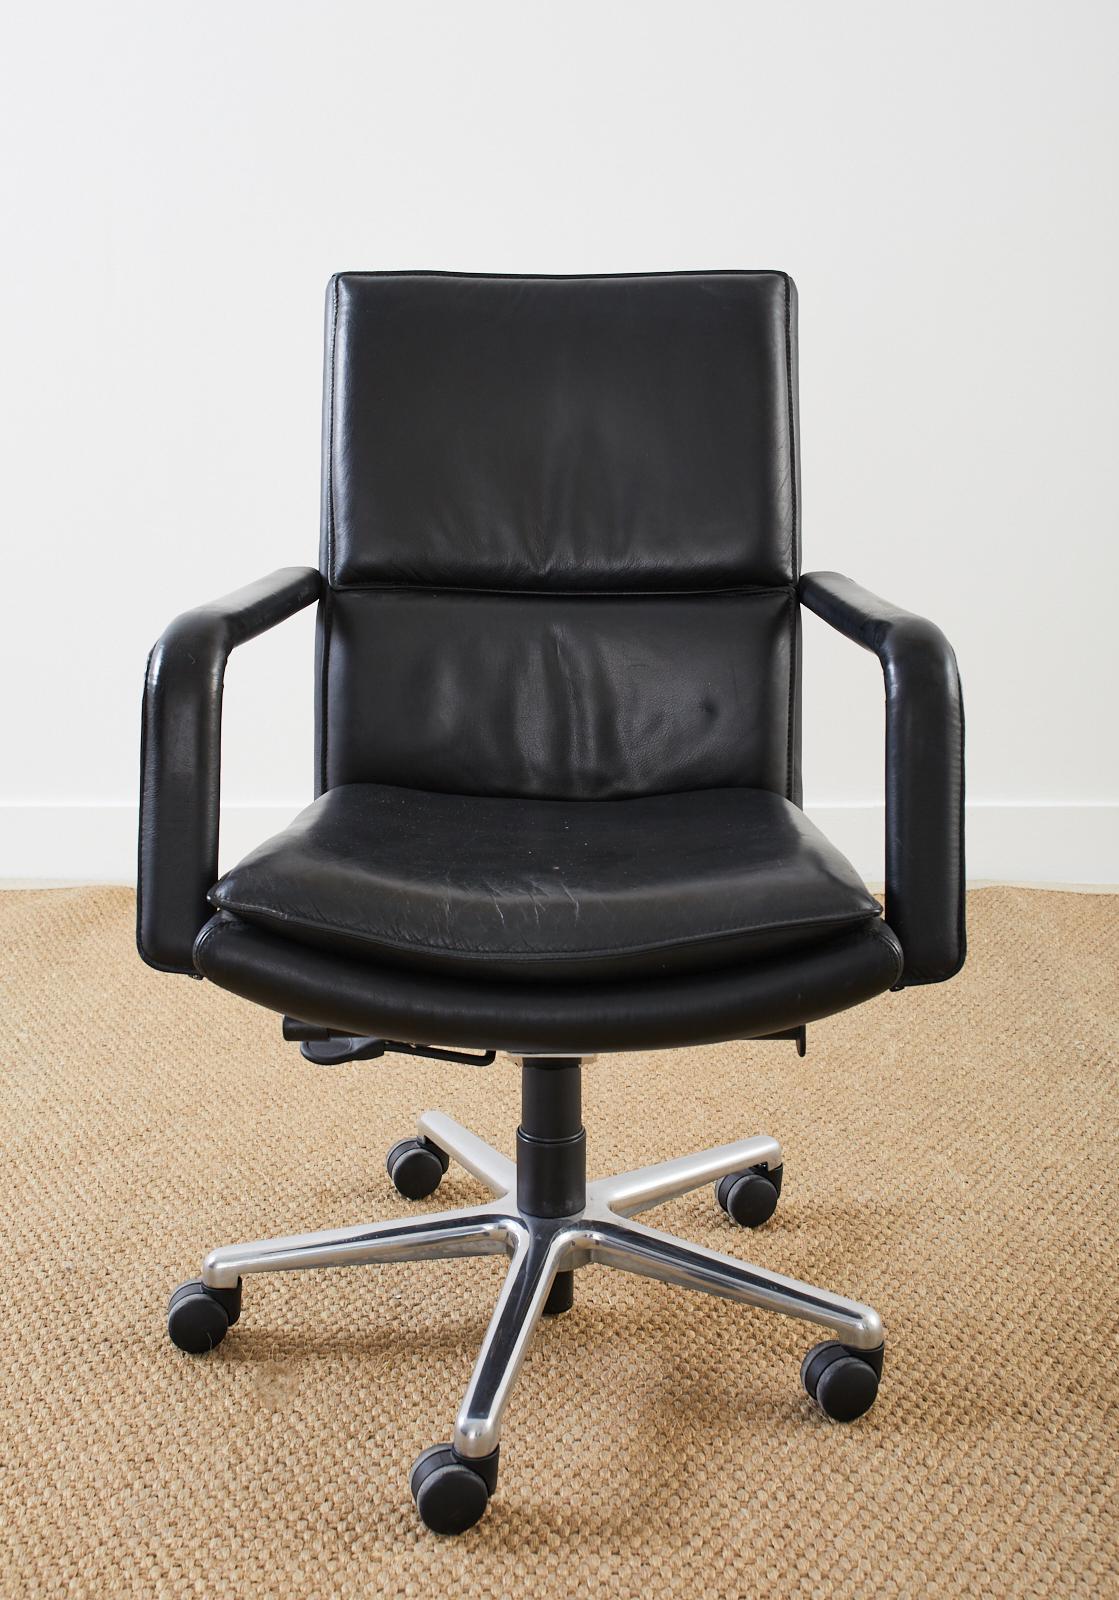 Modern executive office desk swivel armchair made by Keilhauer. Model number 597-5 finished in black leather upholstery with a five star polished steel base. Mid back height office chair with pneumatic height adjustment and tilt. Very comfortable